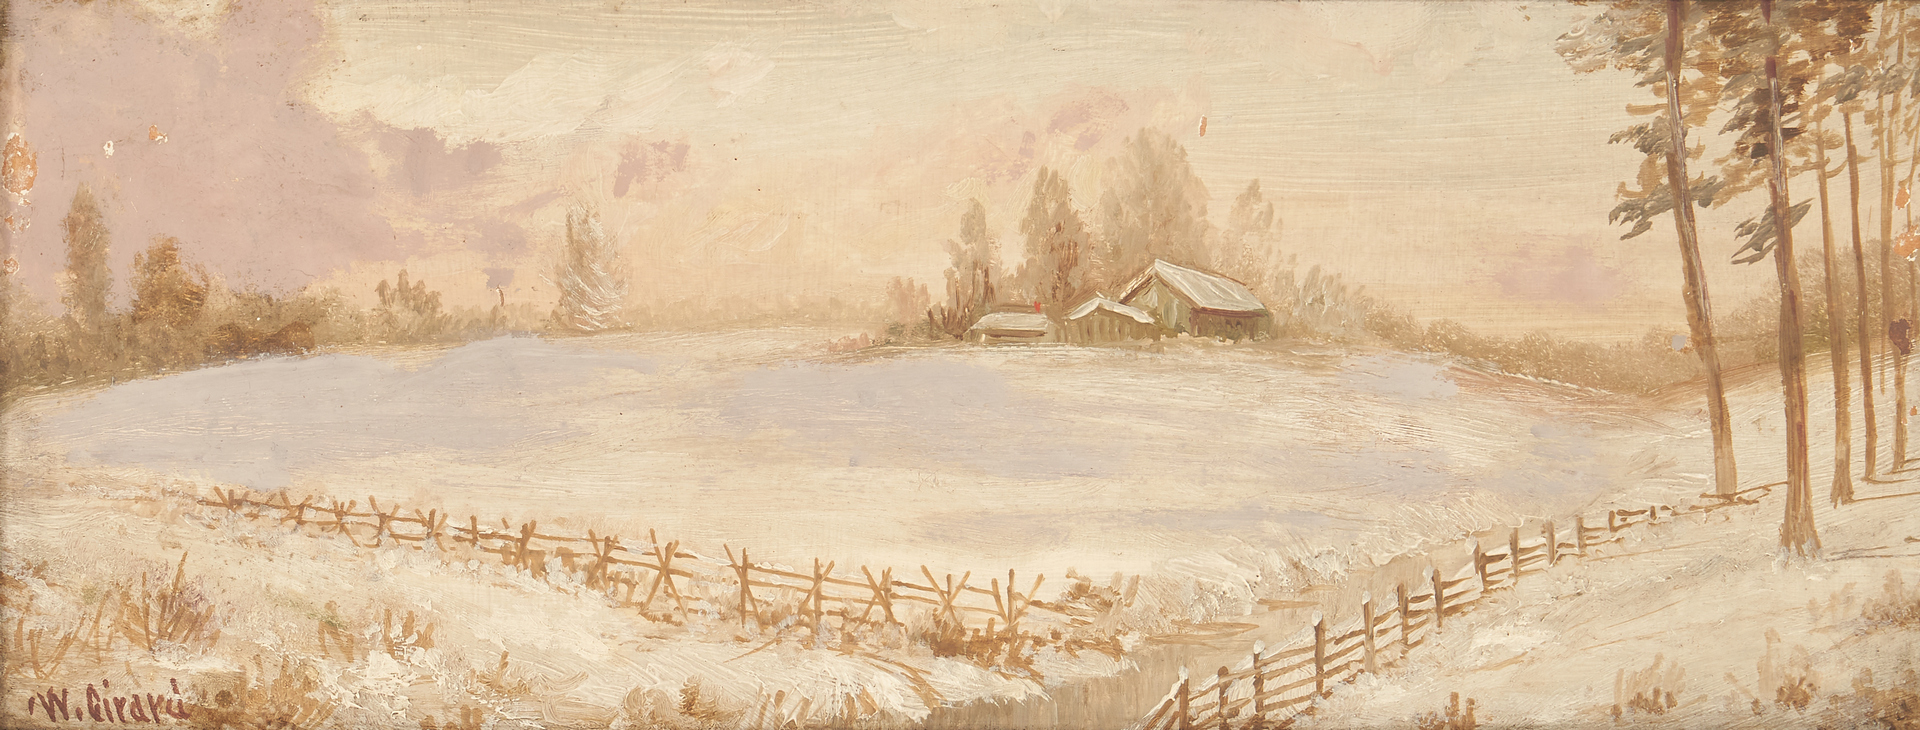 Lot 992: 2 Washington Girard paintings, Winter Landscape and Mountain in Spring